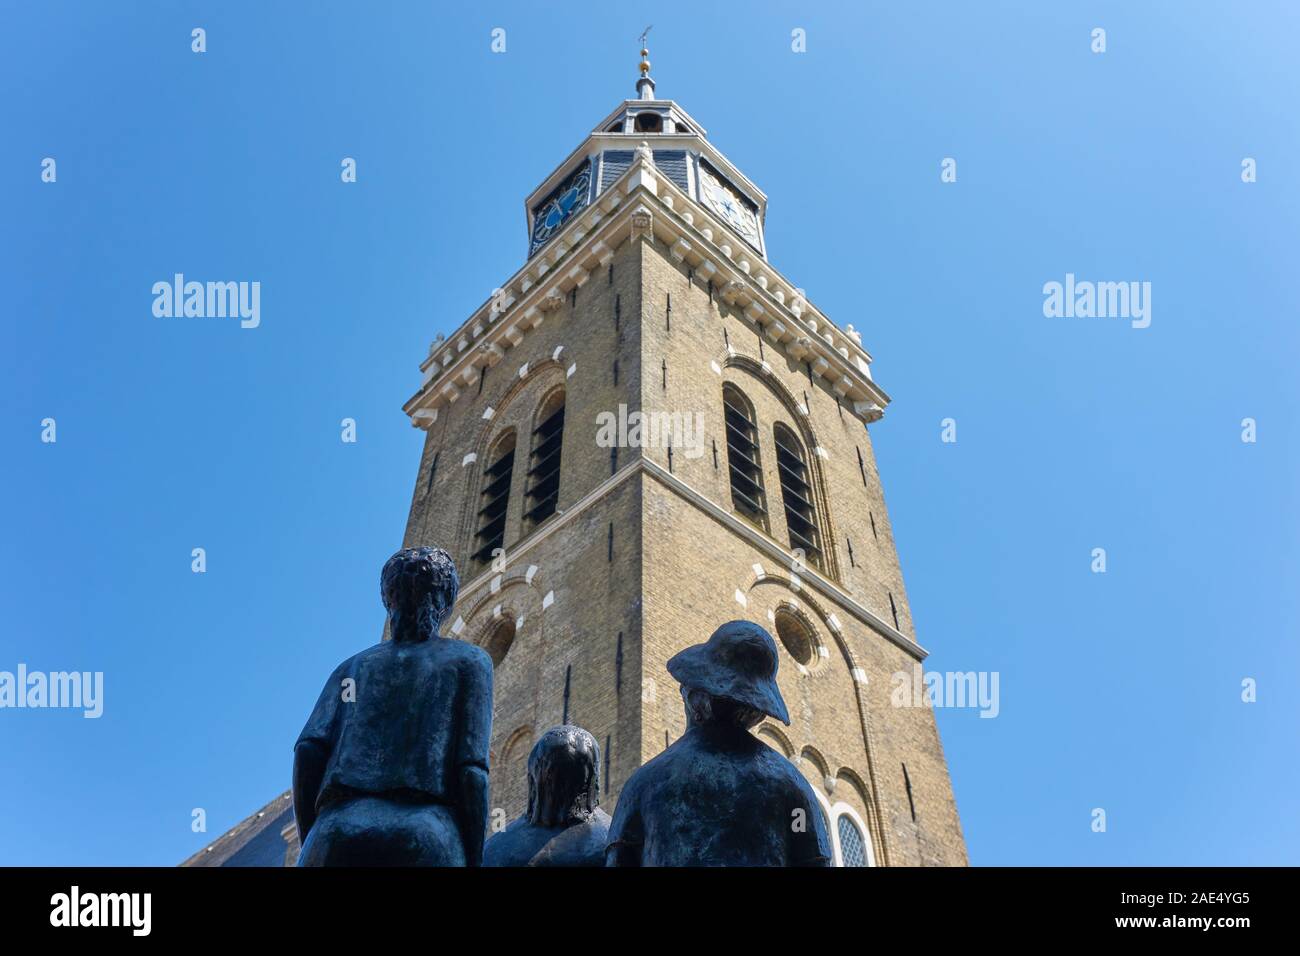 Low view on the Jouster Toren or Jouster Toer in Joure against a blue sky. In front a bronze sculpture of people looking at it. Stock Photo